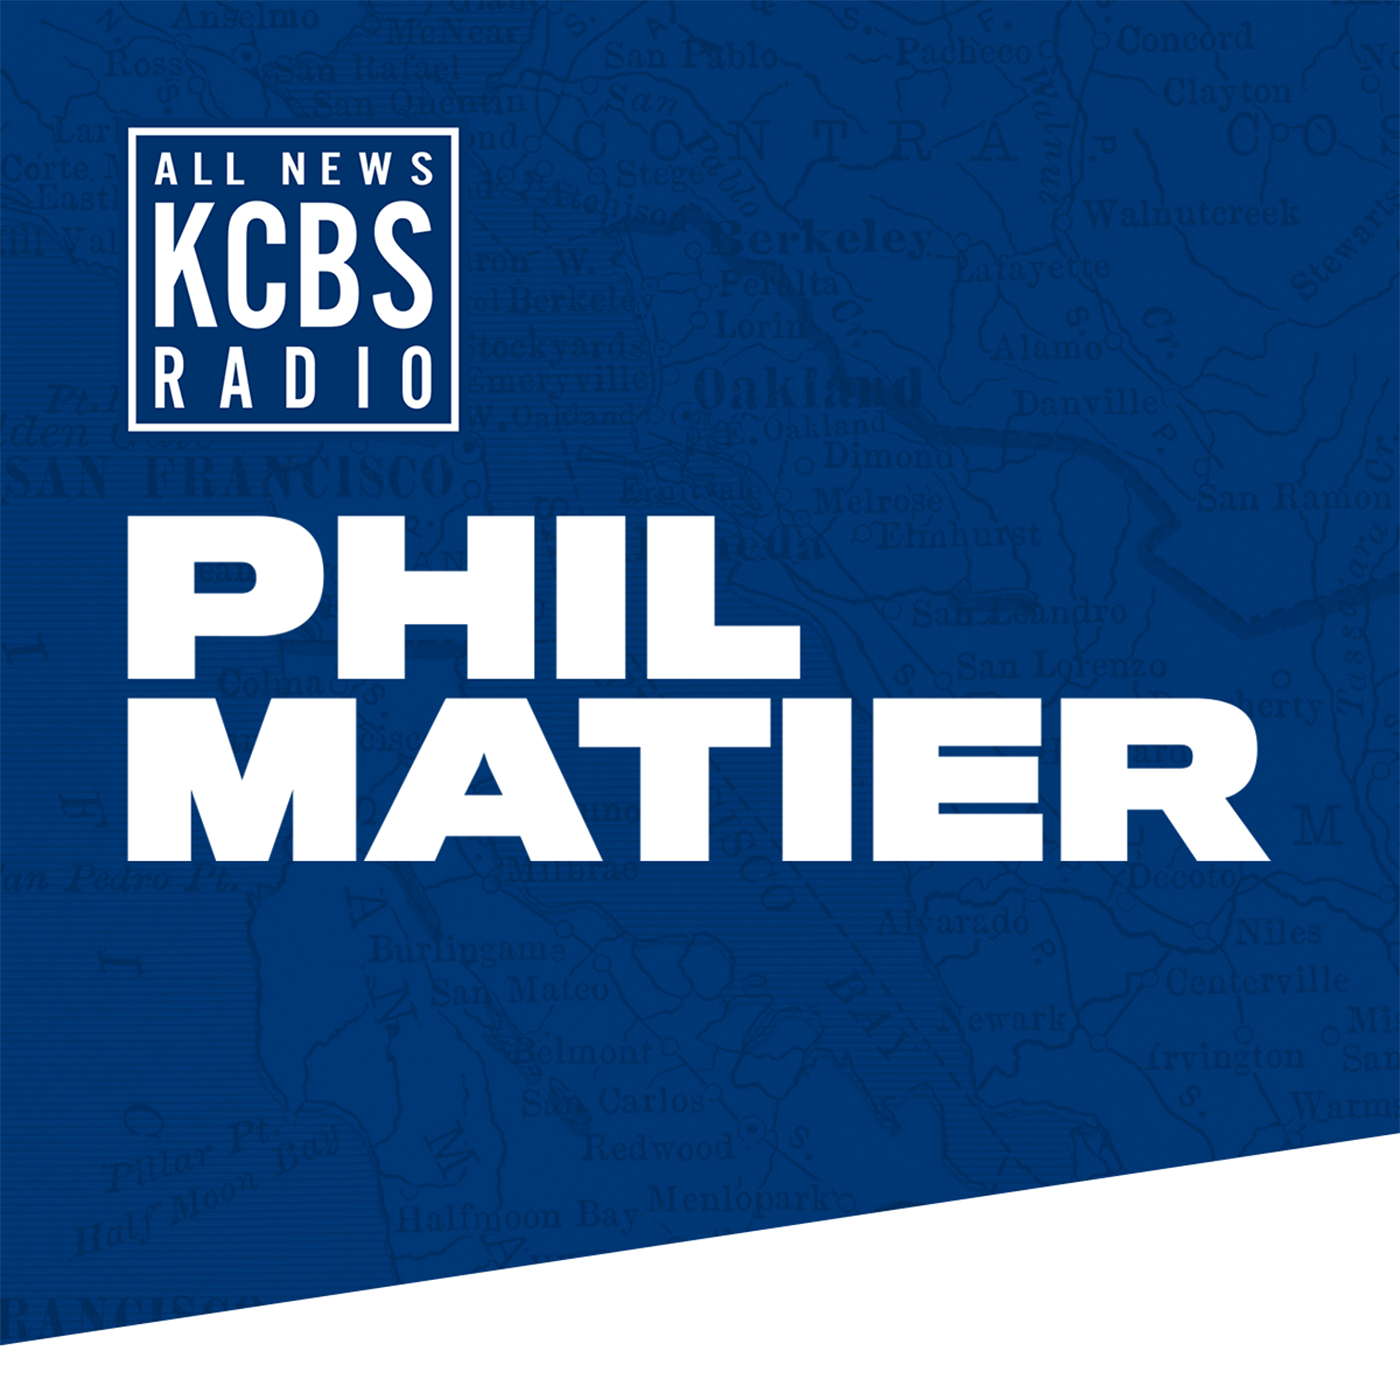 Phil Matier: Governor Newsom Prioritizes Homelessness in State of the State Speech